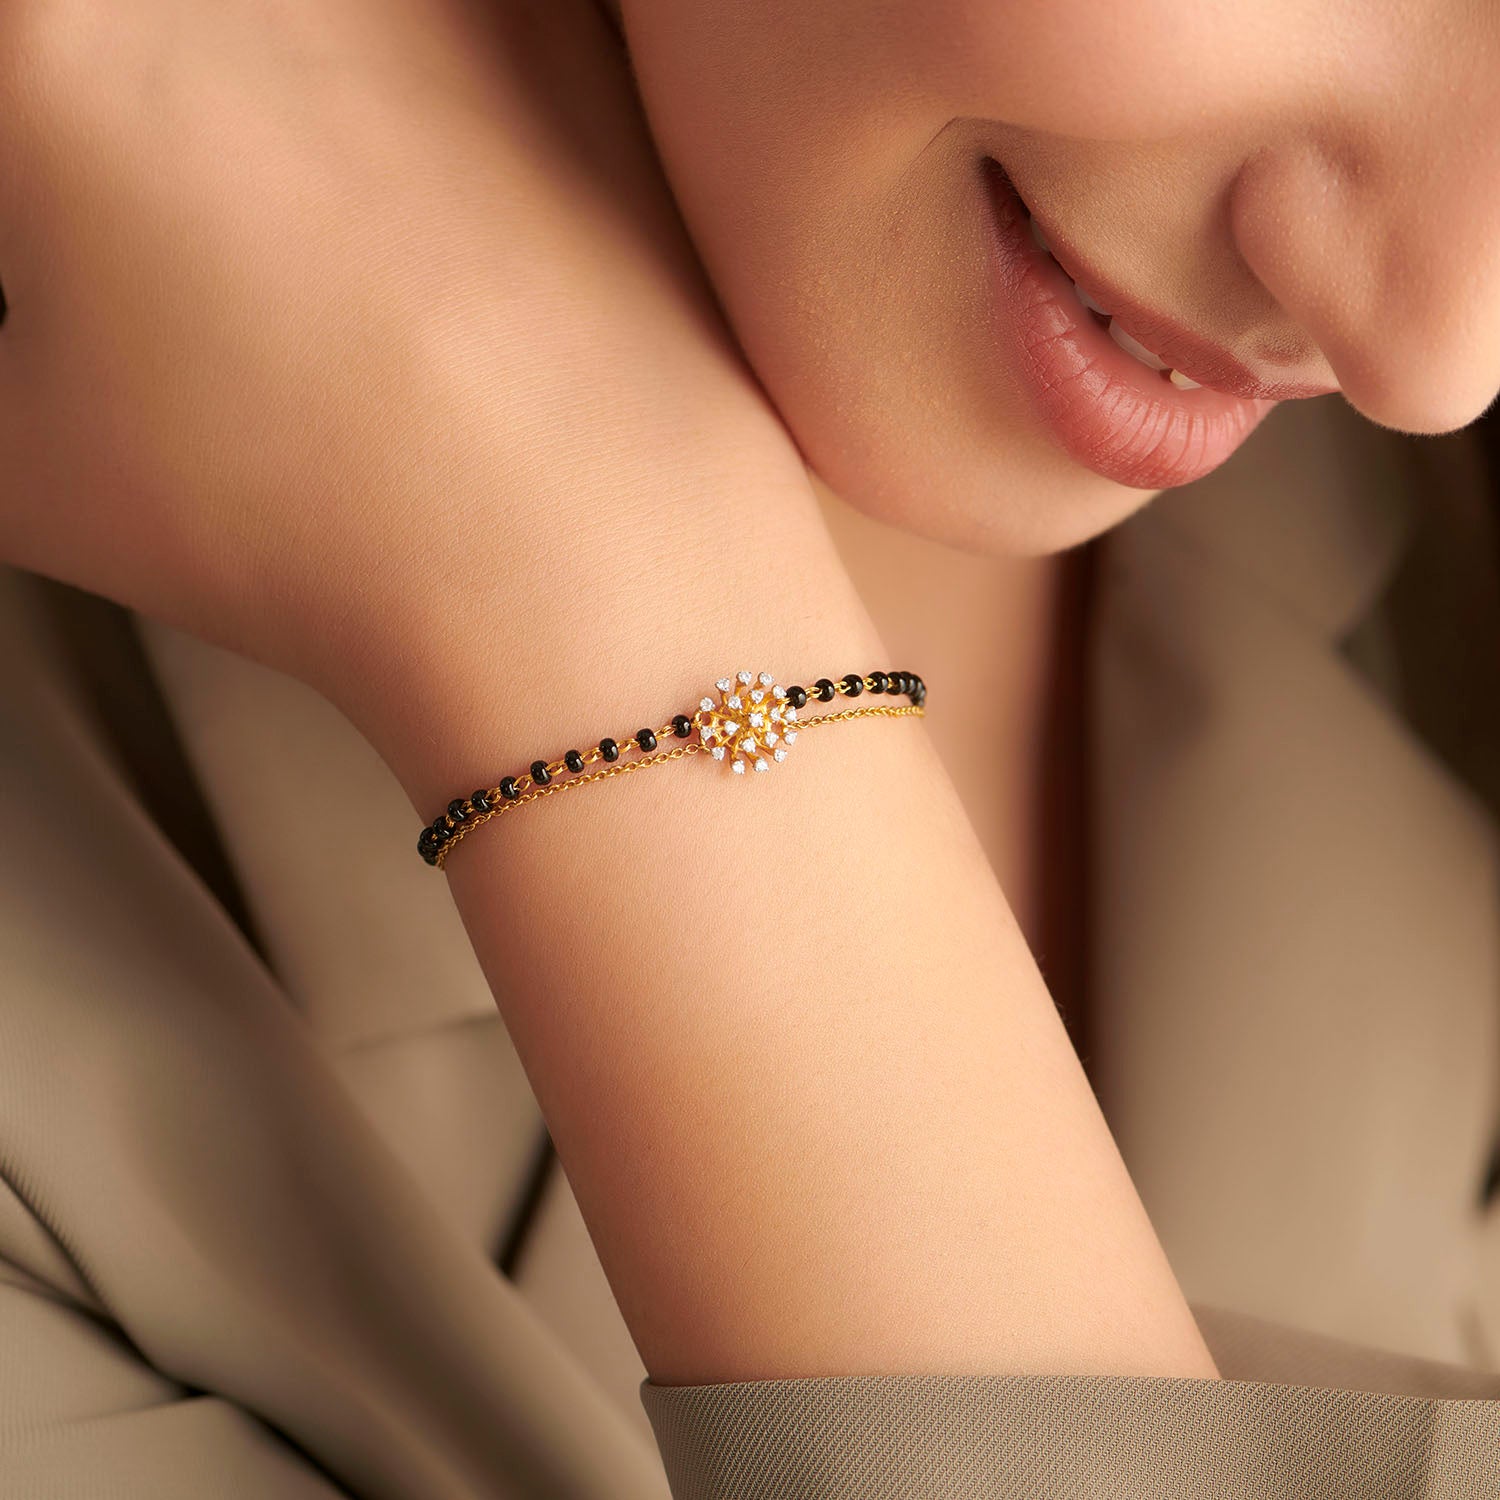 Mangalsutra Bracelet - Buy Mangalsutra Bracelet Online Starting at Just ₹63  | Meesho